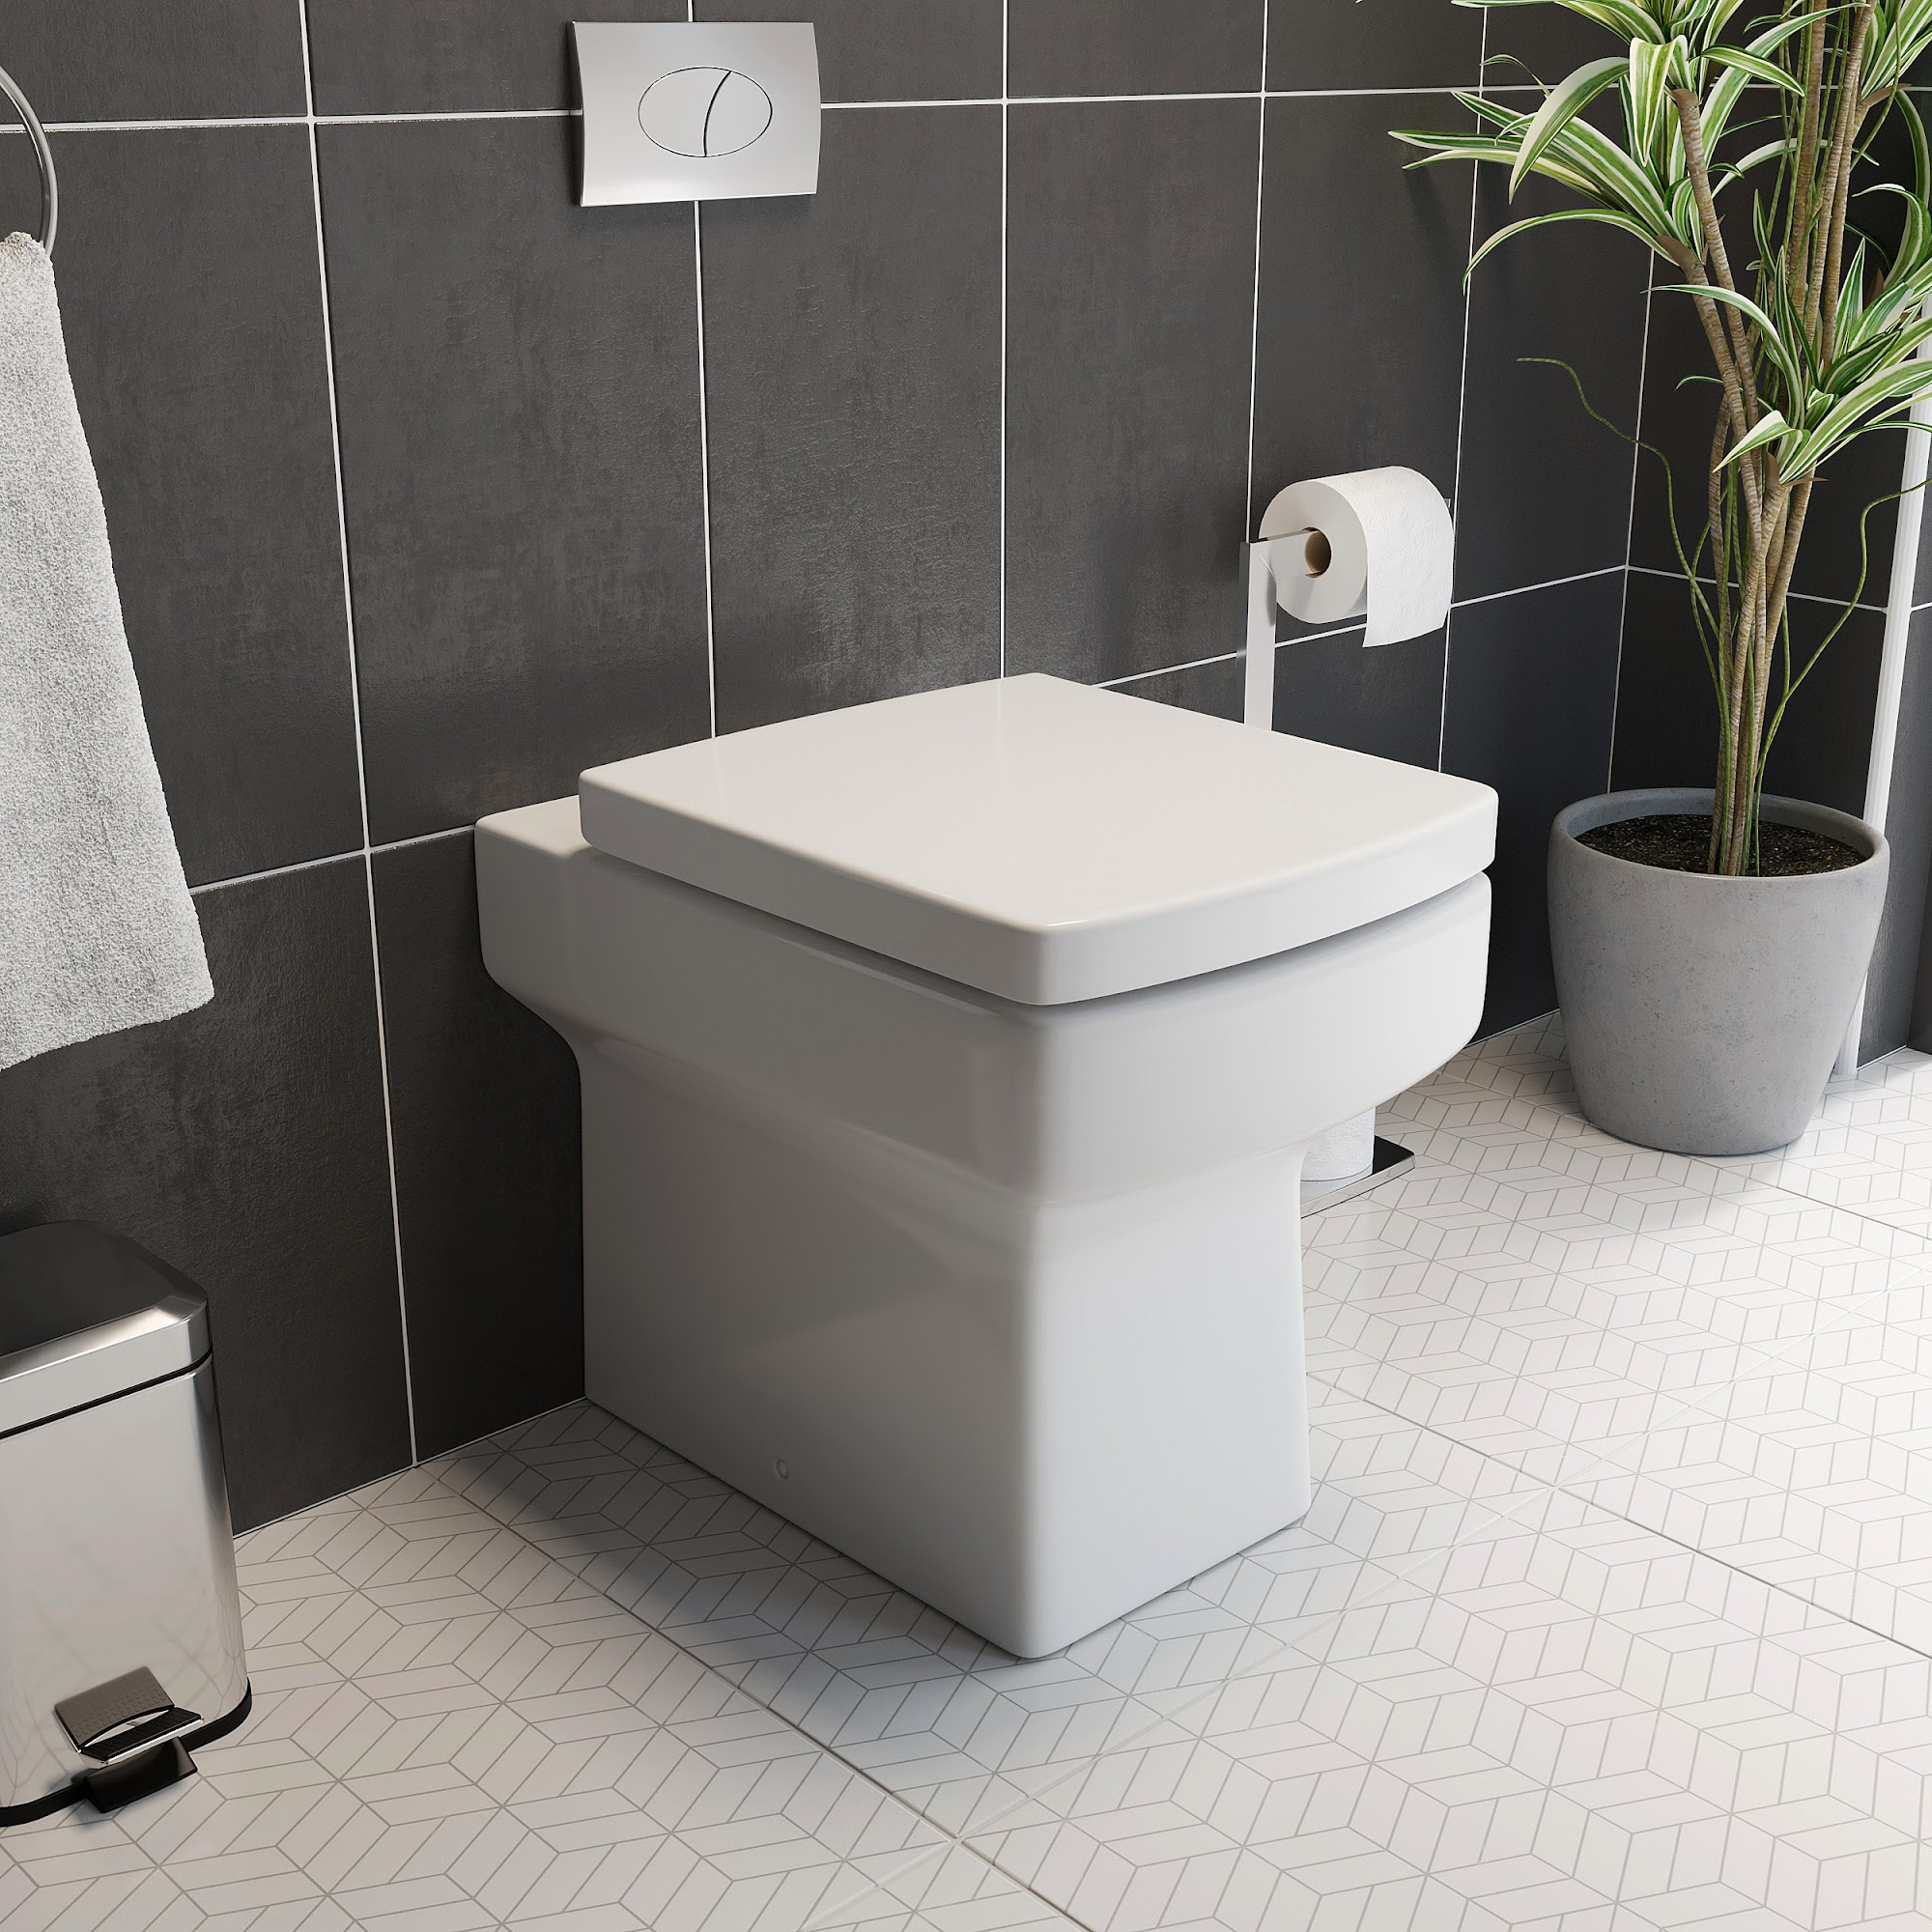 Back To Wall BTW Toilet WC Pan Square Soft Close Seat Cistern Dual Flush Button 5056093684288 eBay